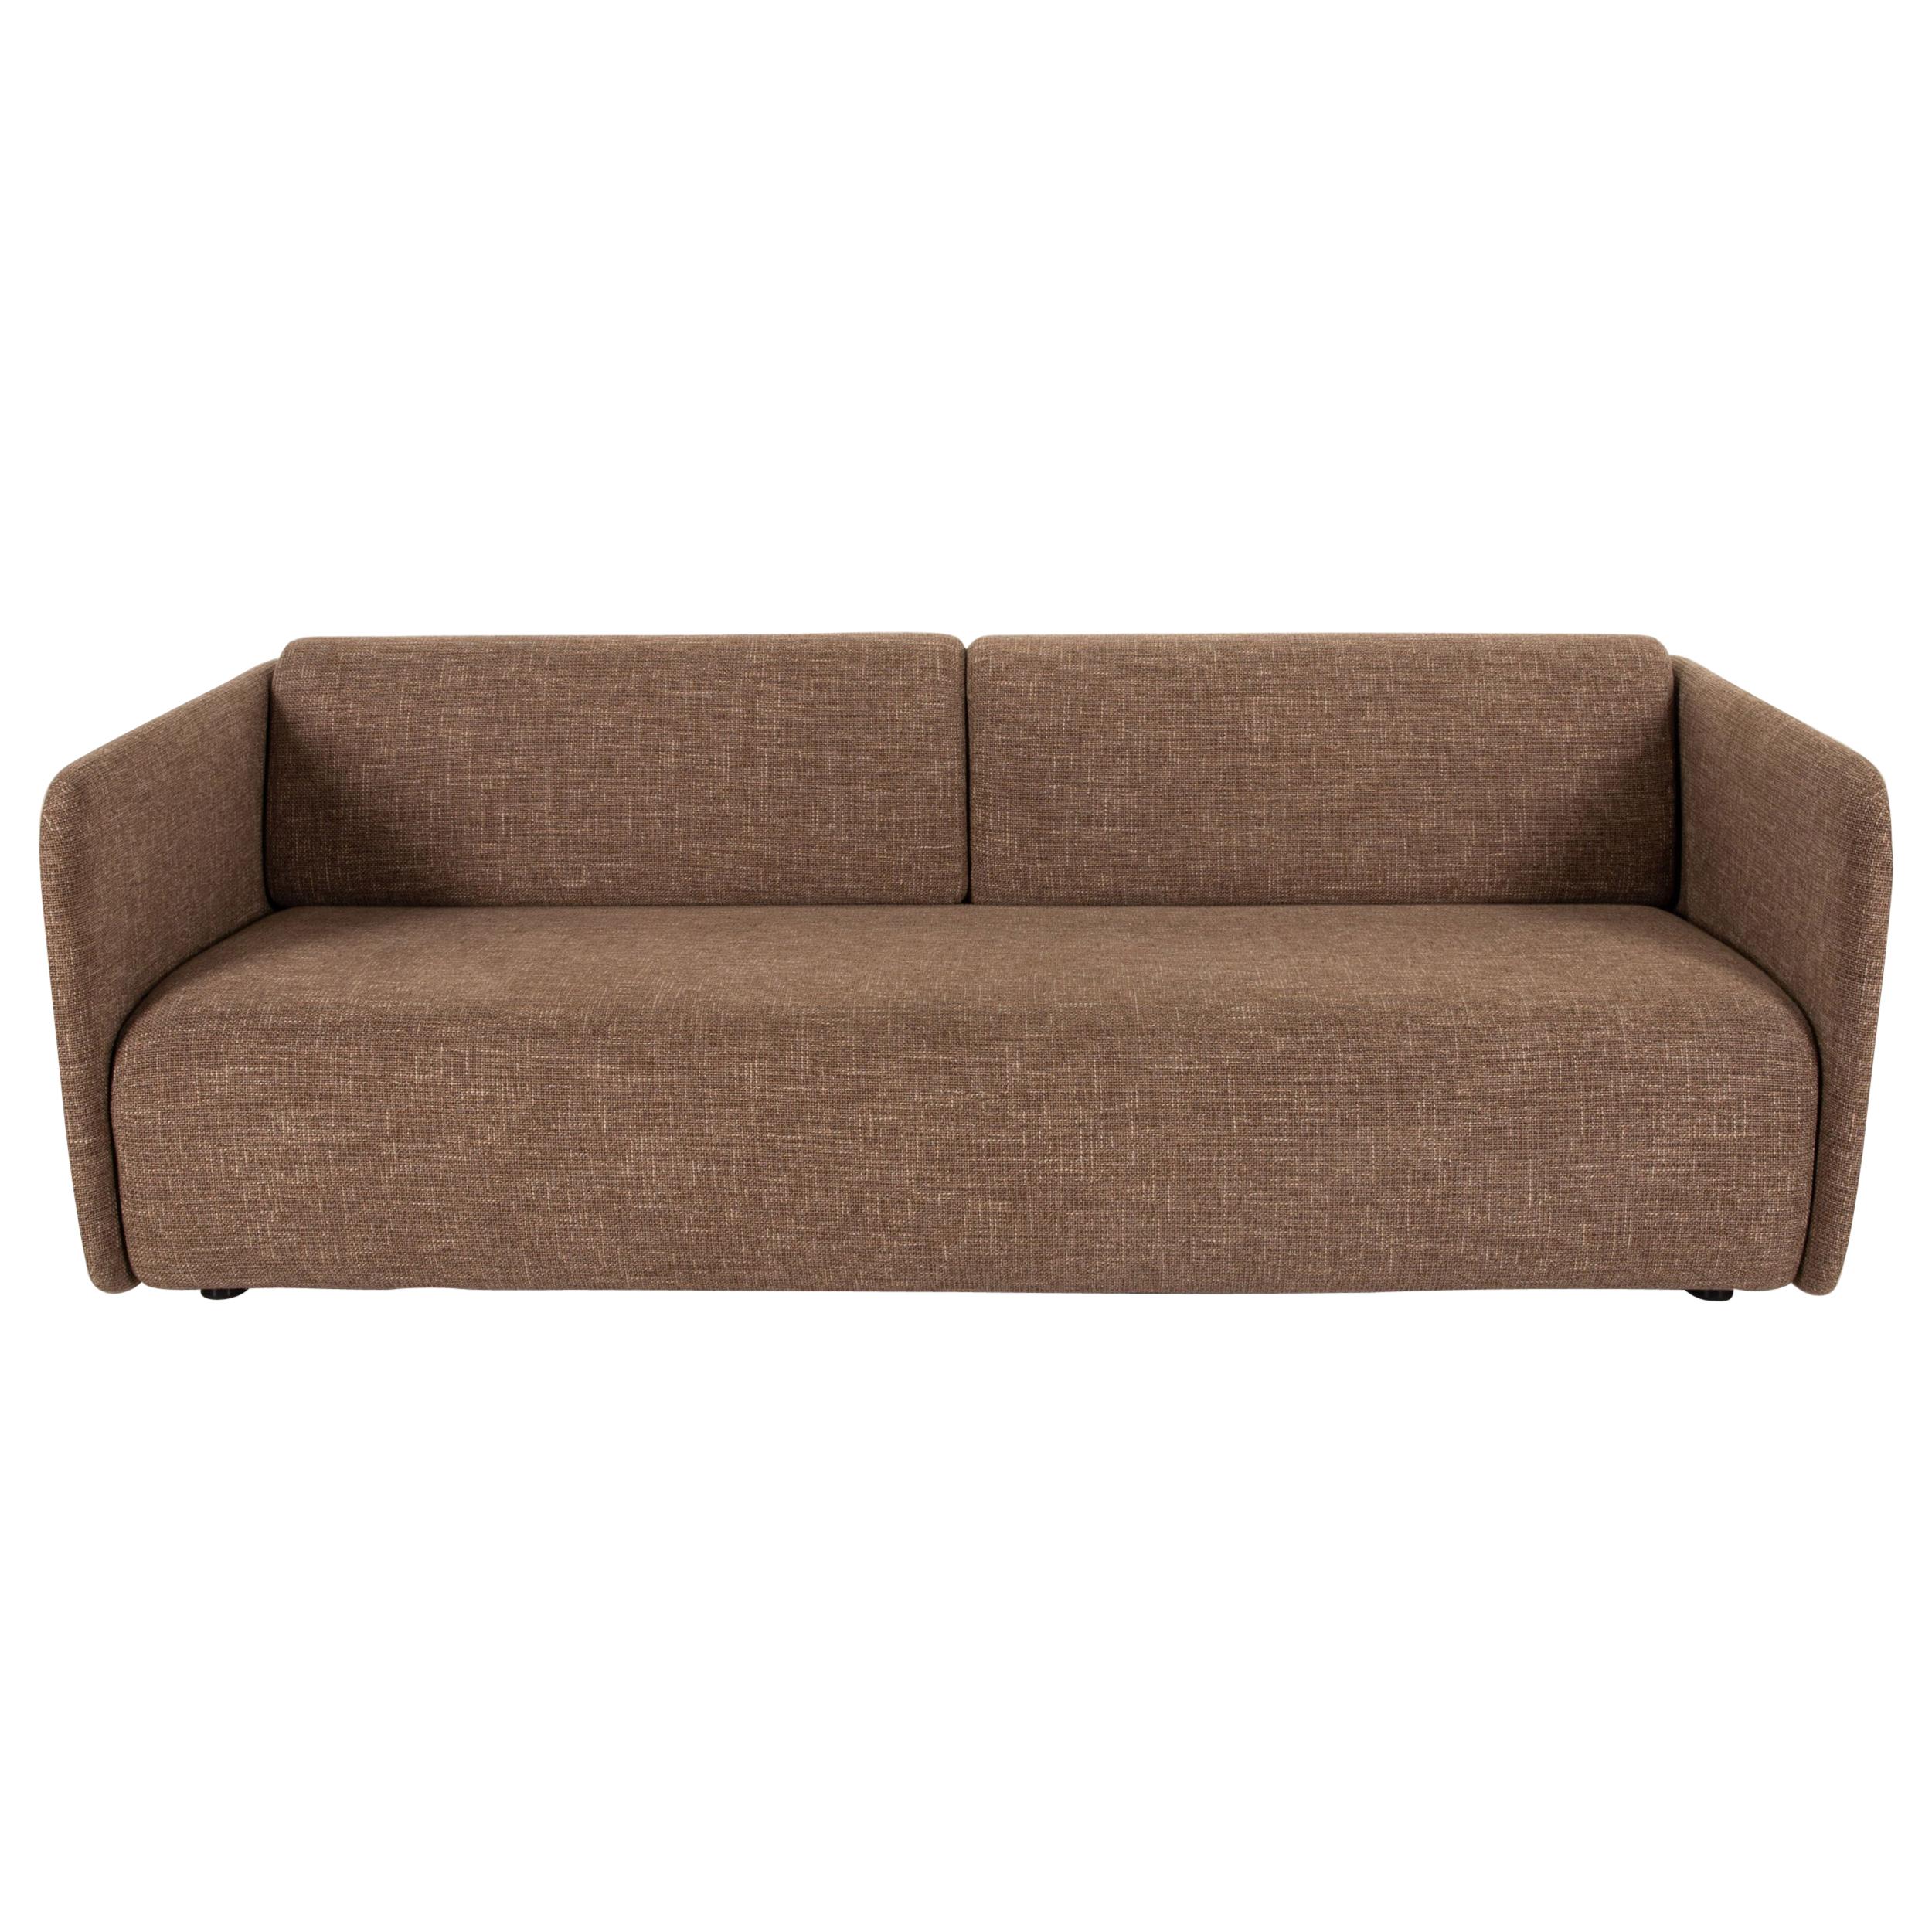 Rolf Benz 6900 Fabric Leather Three-Seater Cream Brown Sofa Couch For Sale